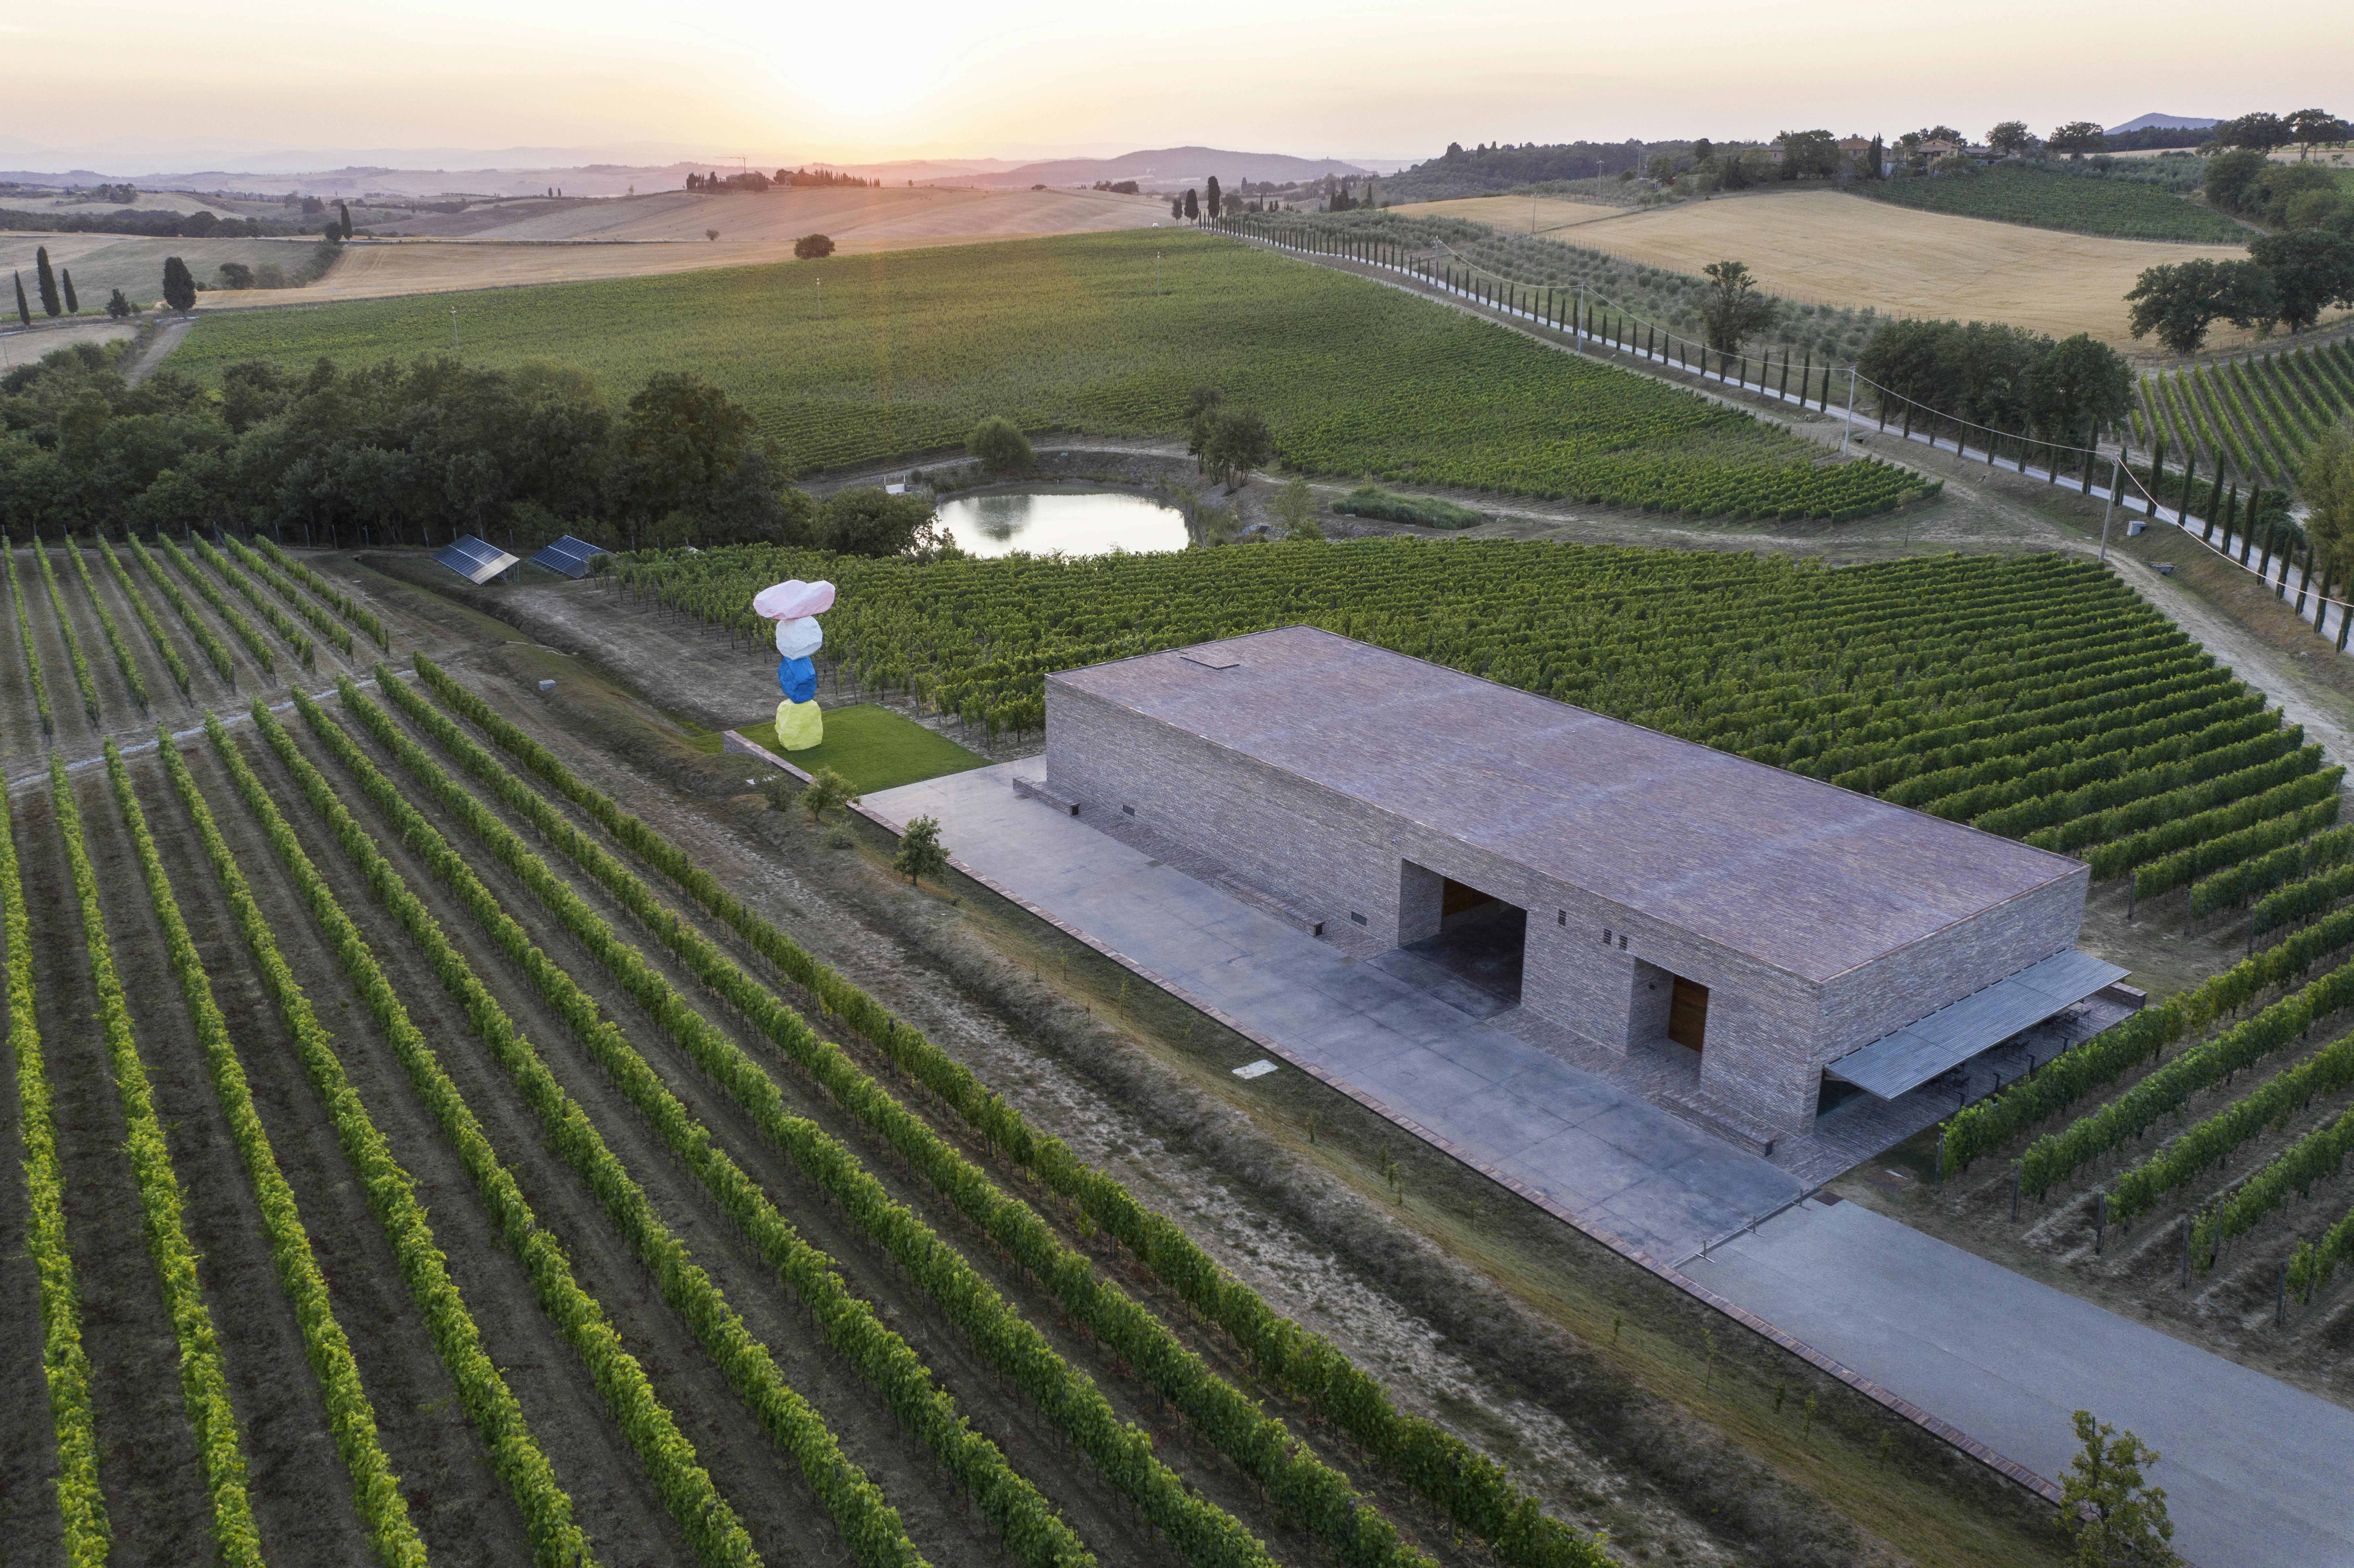 Aerial view by drone of the winery with the sculpture of Ugo Rondinone, lake, vineyards and Pienza